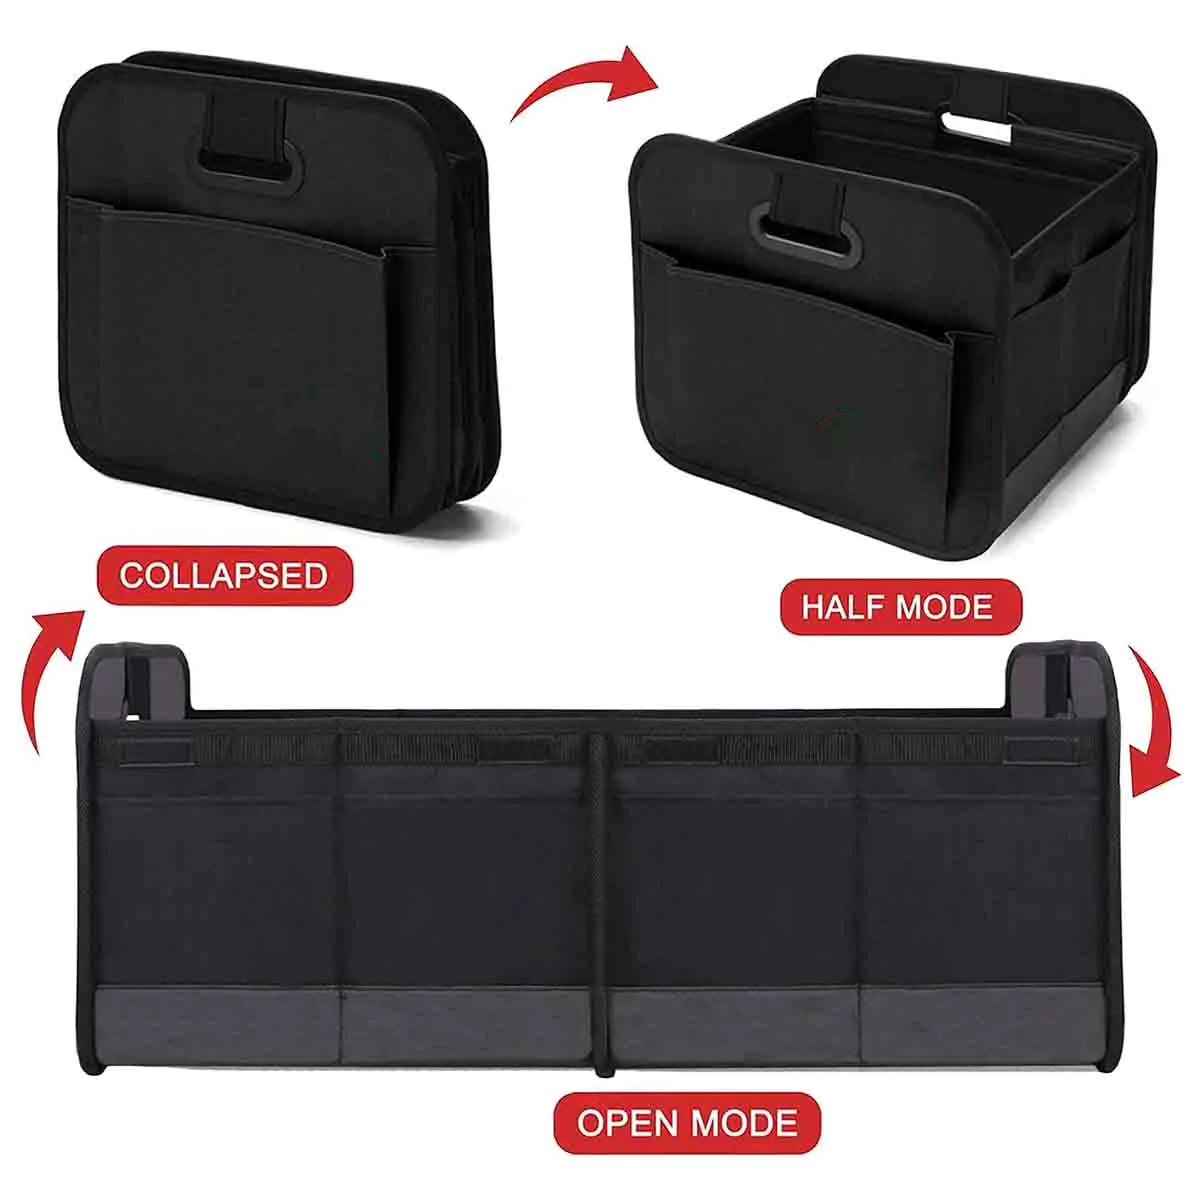 Custom Text For Car Trunk Organizer Storage, Compatible with All Cars, Reinforced Handles, Collapsible Multi, Compartment Car Organizers, Foldable and Waterproof, 600D Oxford Polyester MB12995